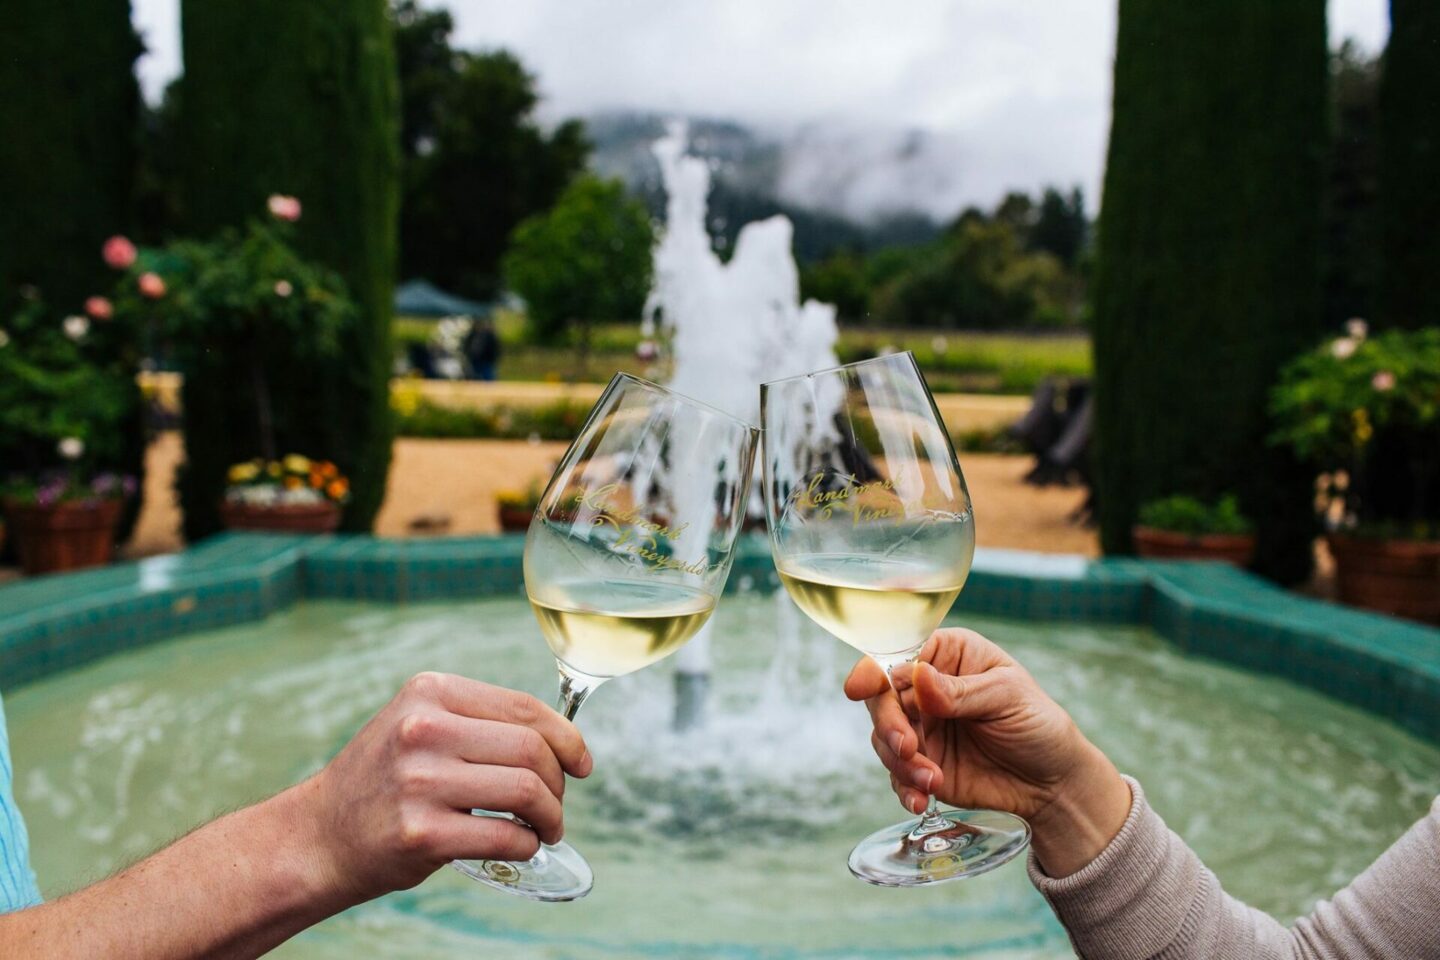 Two hands cheer wine glasses in front of a bubbling fountain